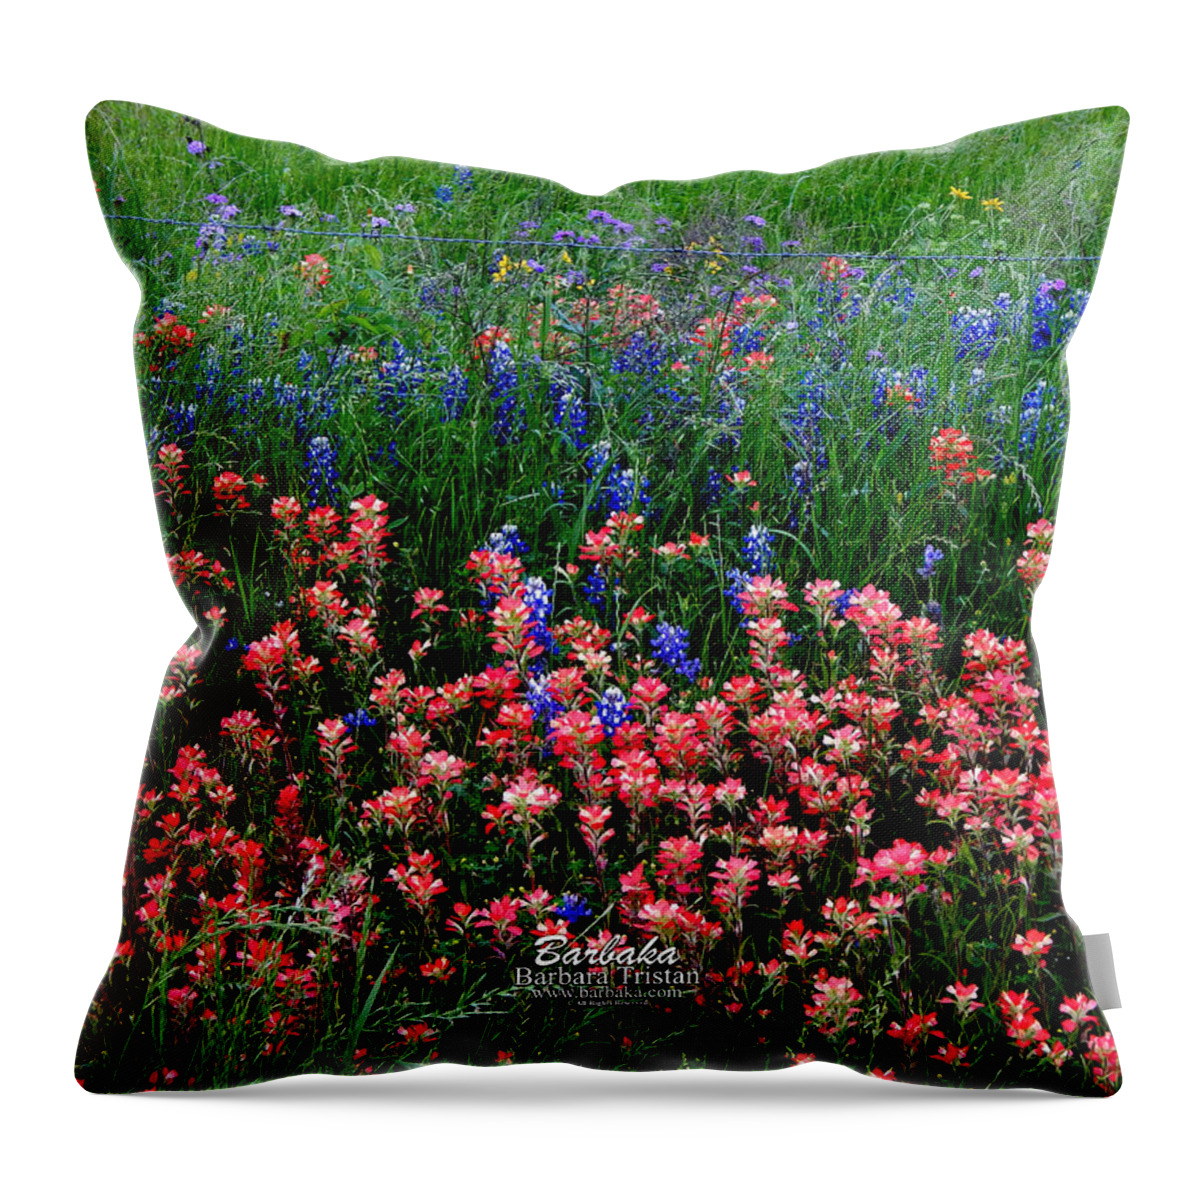 Texas Throw Pillow featuring the photograph Indian Paintbrush #0486 by Barbara Tristan